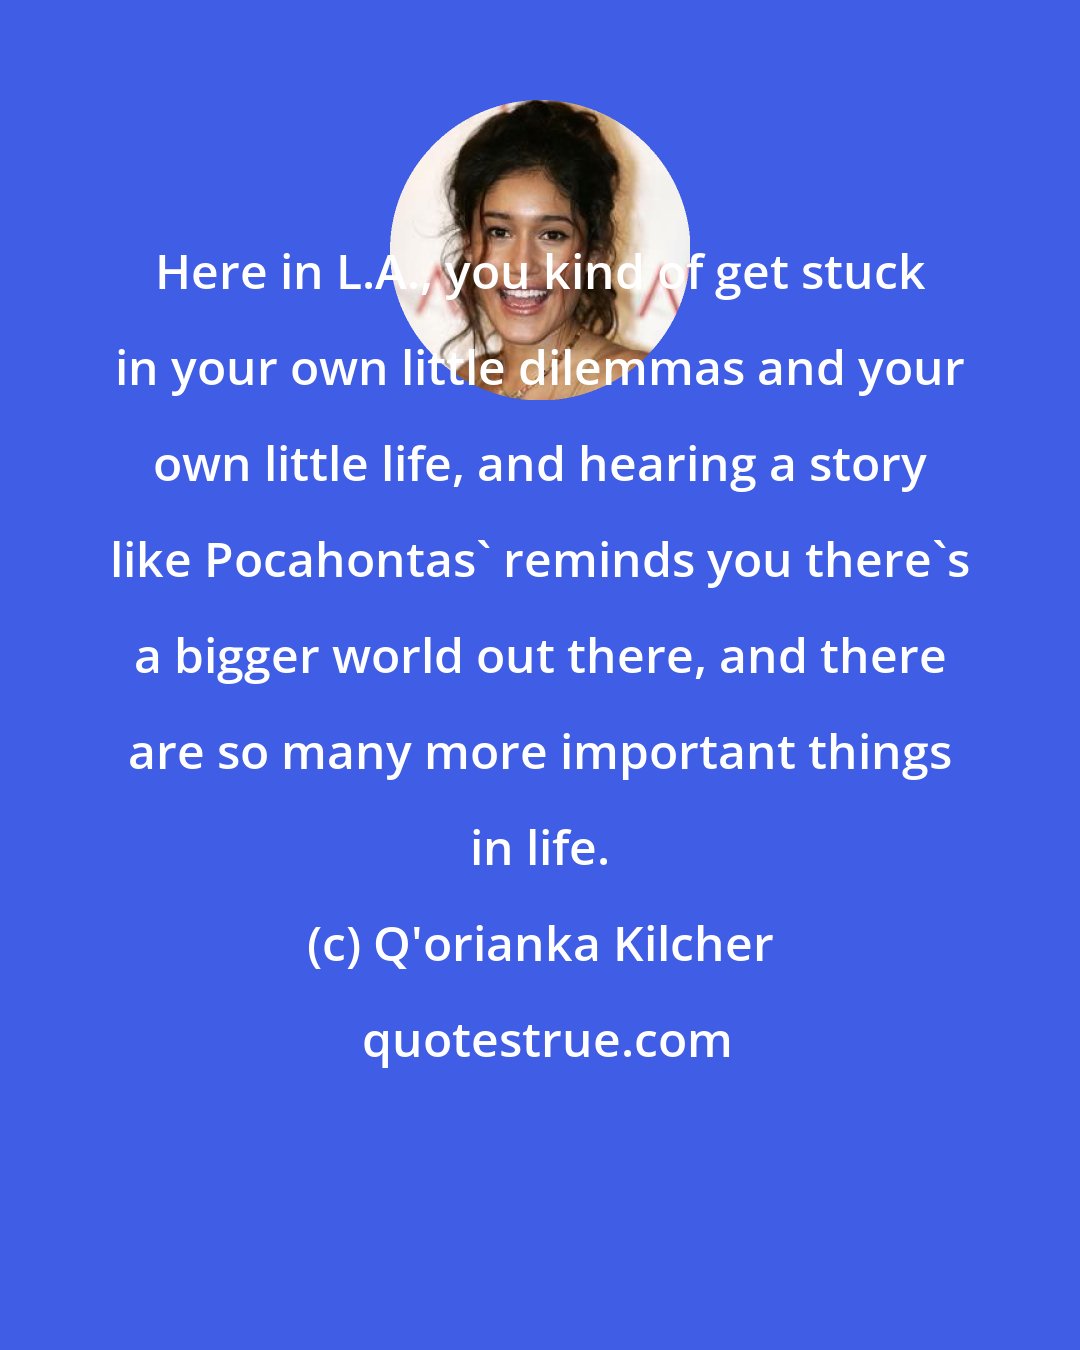 Q'orianka Kilcher: Here in L.A., you kind of get stuck in your own little dilemmas and your own little life, and hearing a story like Pocahontas' reminds you there's a bigger world out there, and there are so many more important things in life.